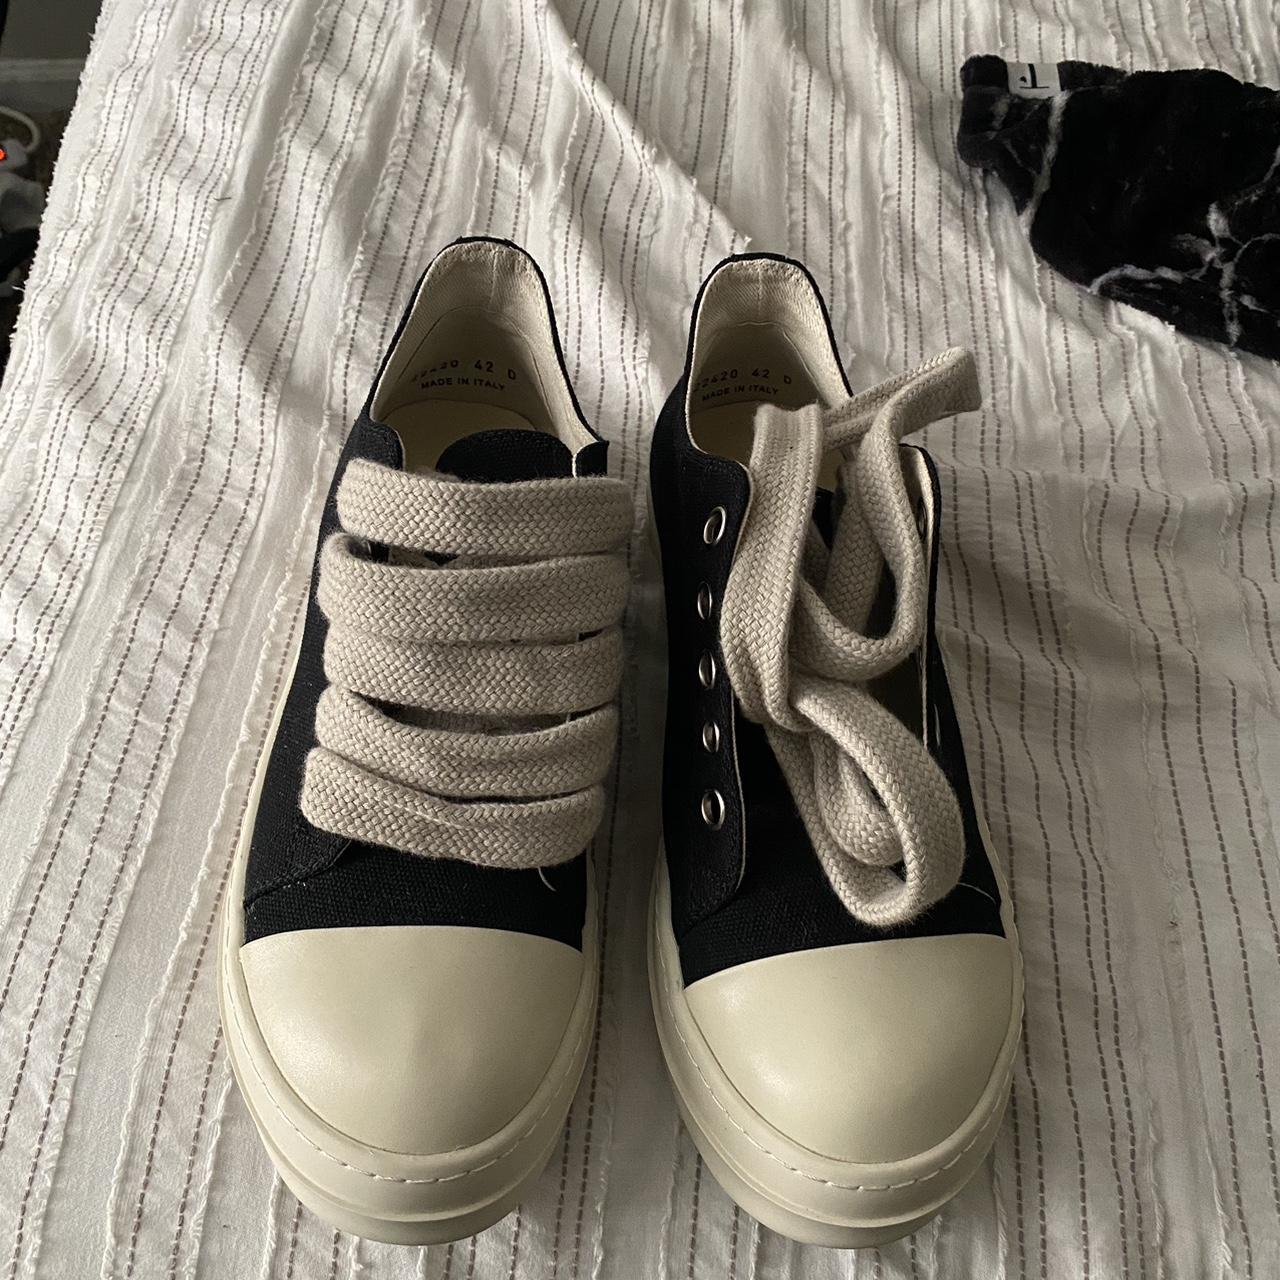 Rick Owens Men's Black and White Trainers | Depop